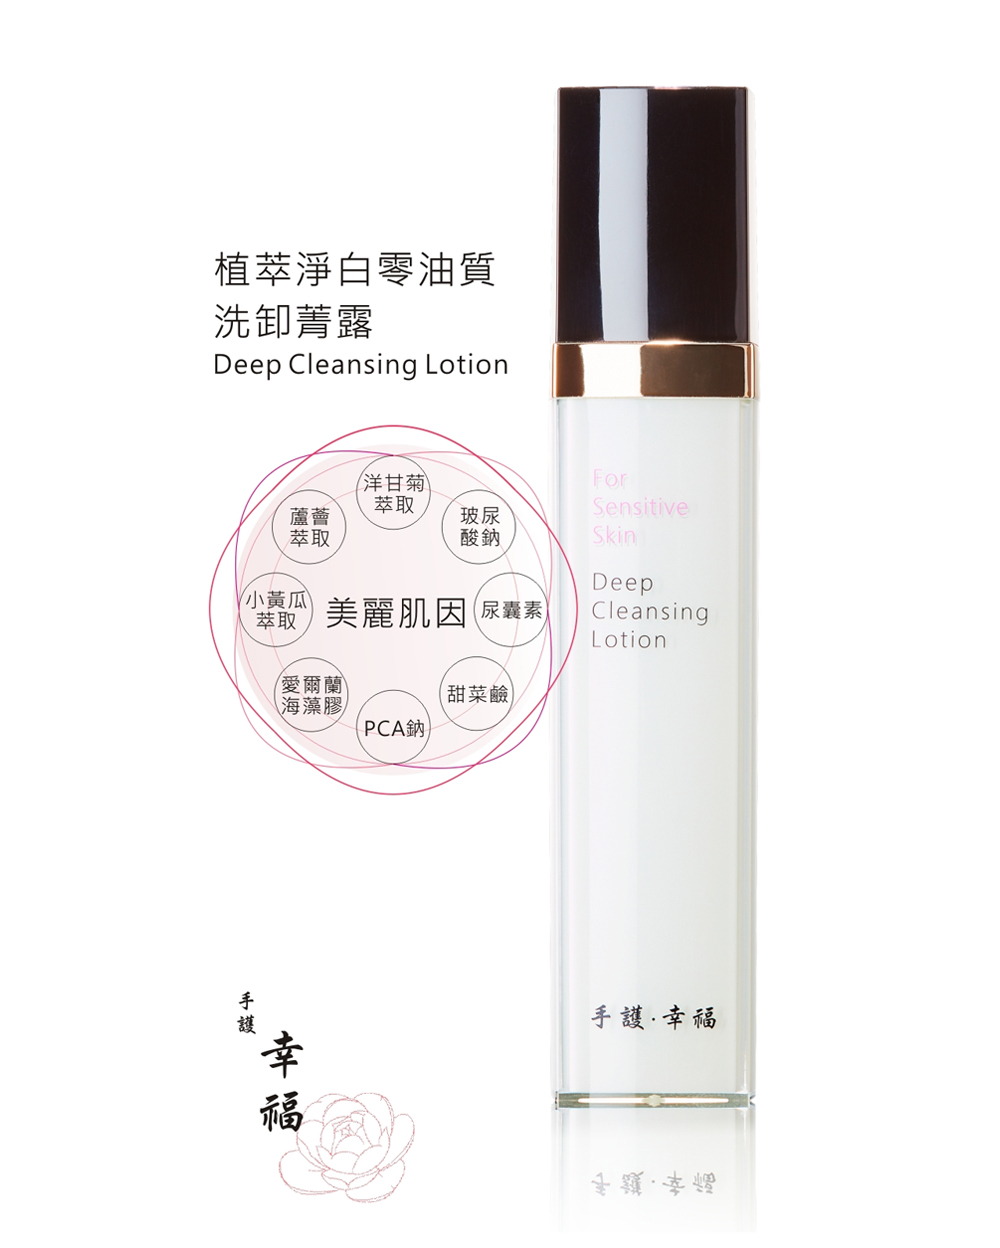 【BSCP】植萃淨白零油質洗卸菁露  Deep Cleansing Lotion